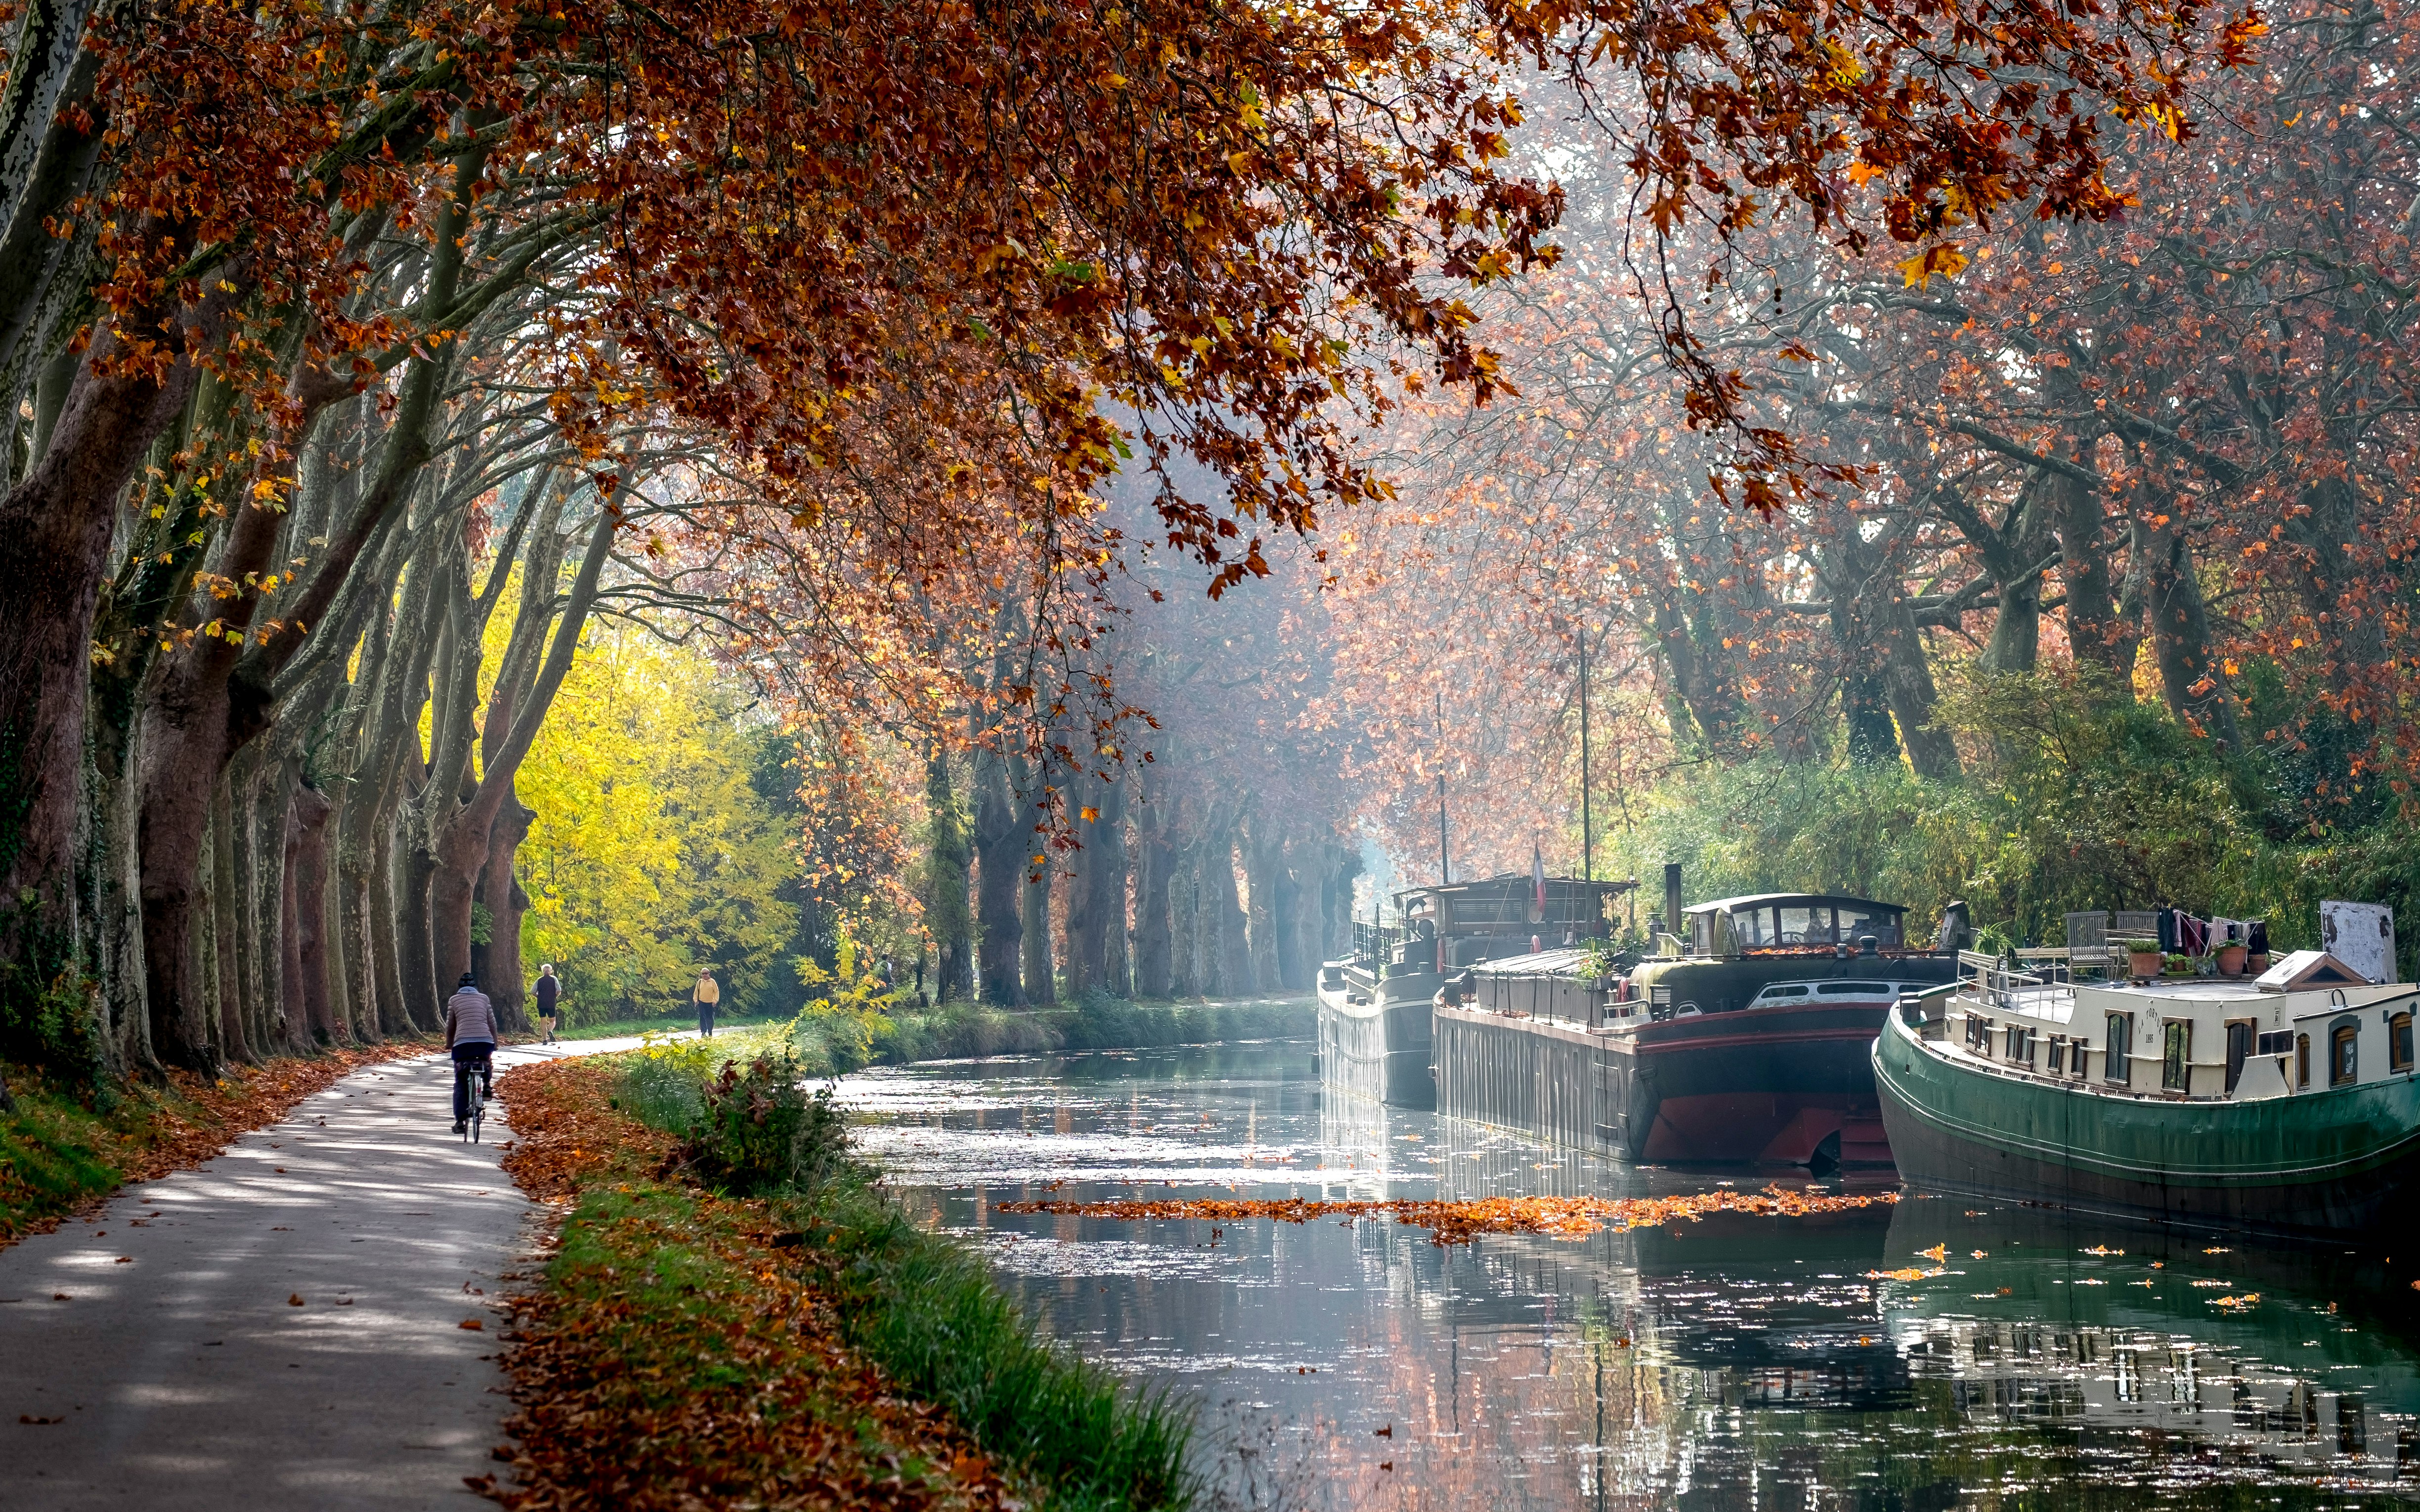 Water canal with houseboats in autumn, cycling trail